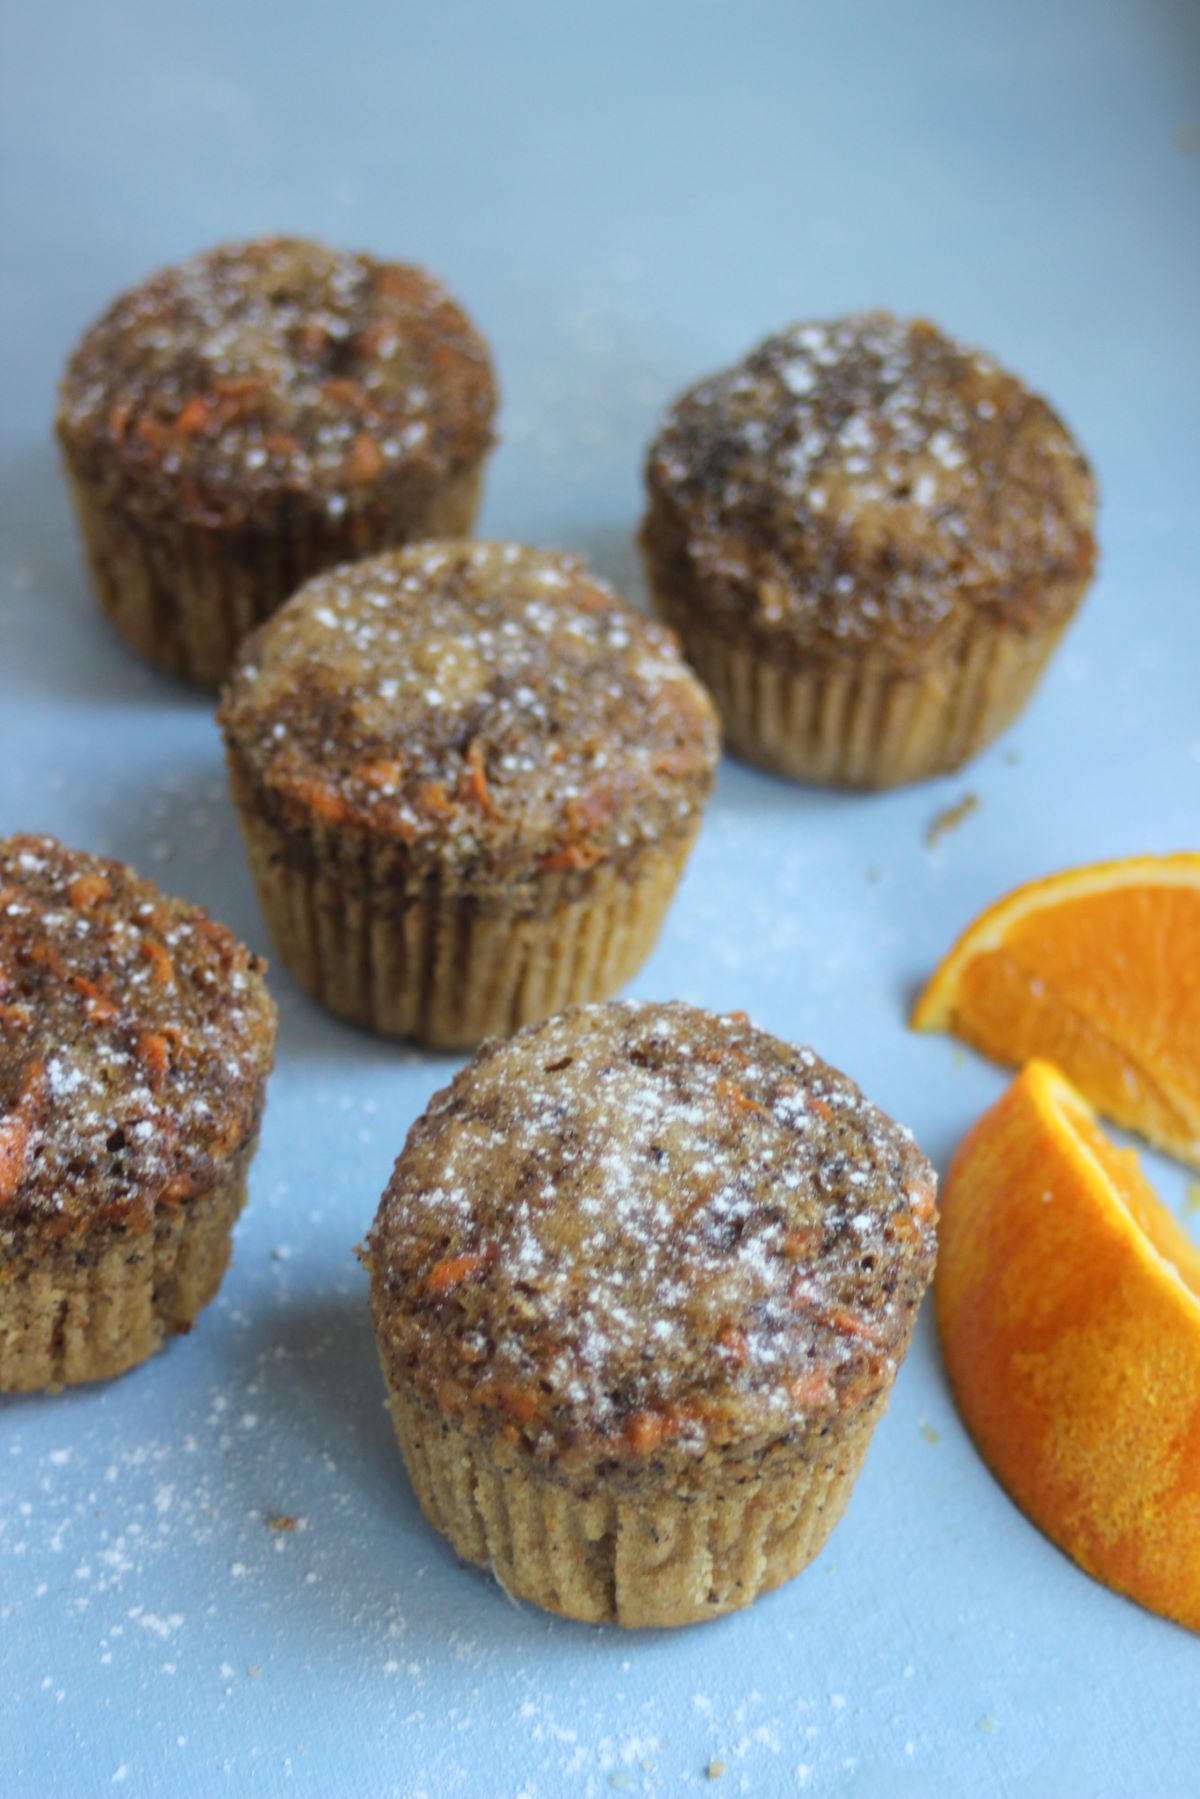 Carrot cake muffins, two orange slices, on a light blue surface.